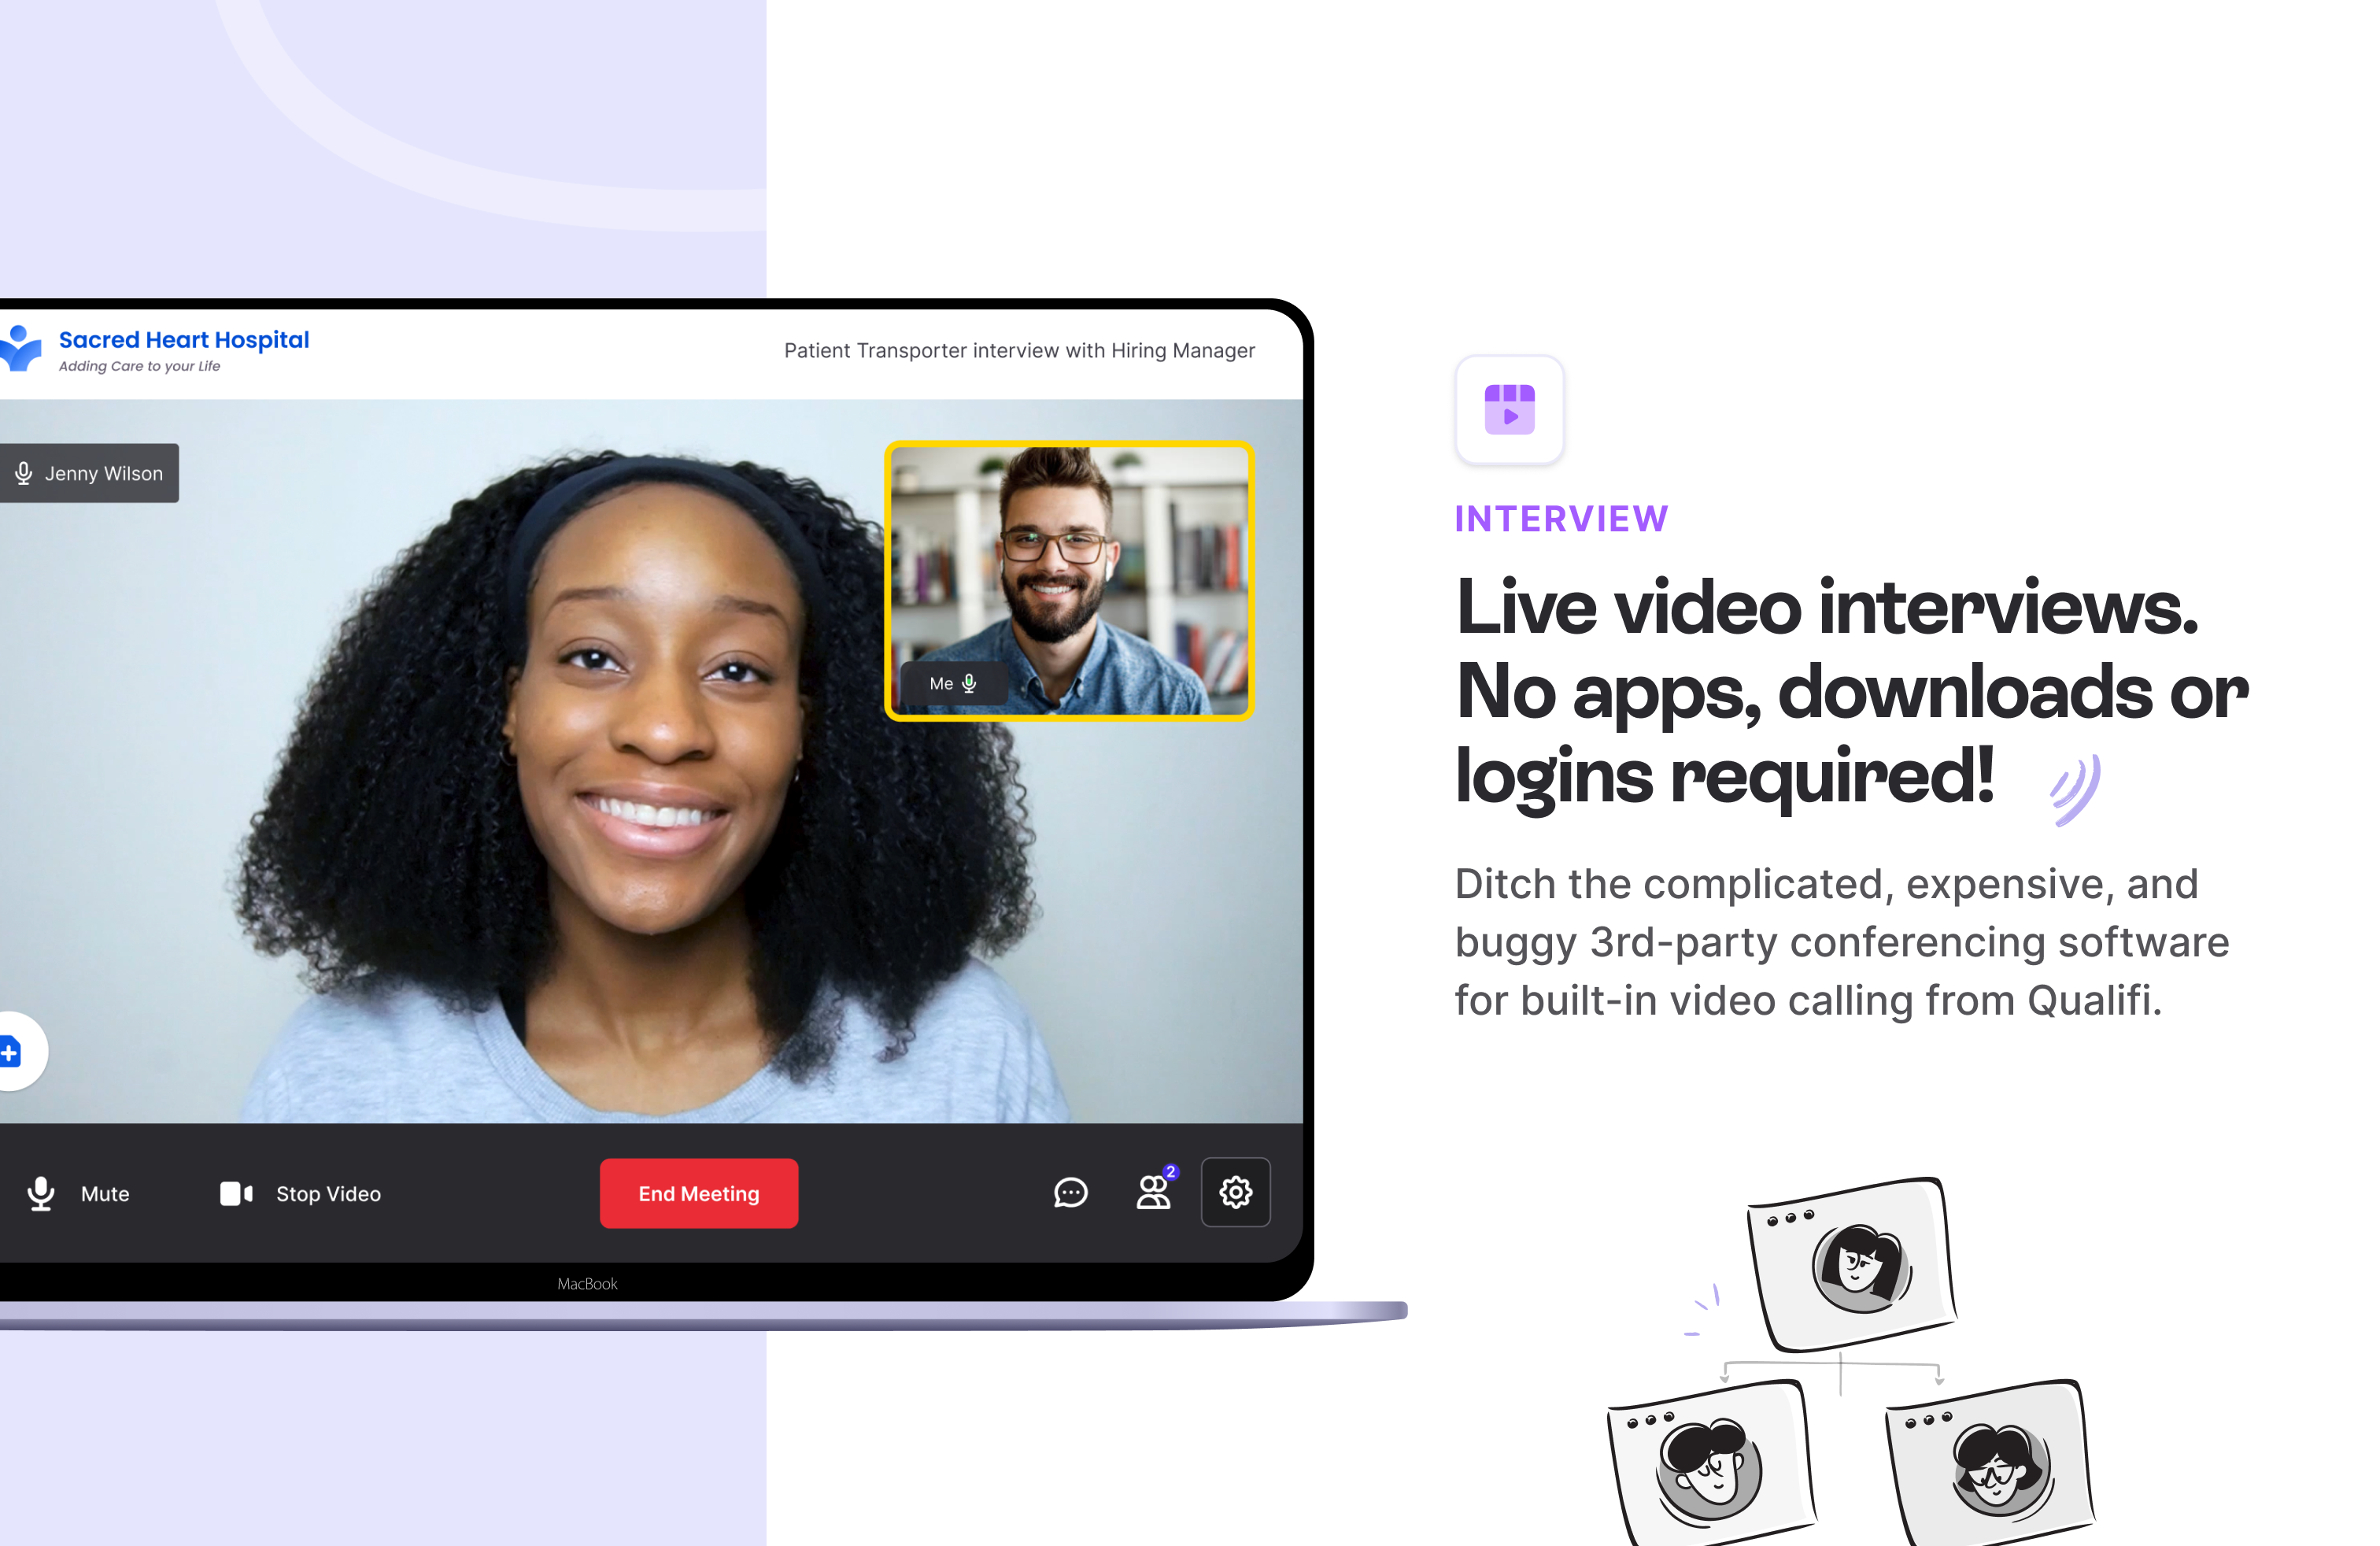 Live video interviews—no apps, downloads, or logins required!